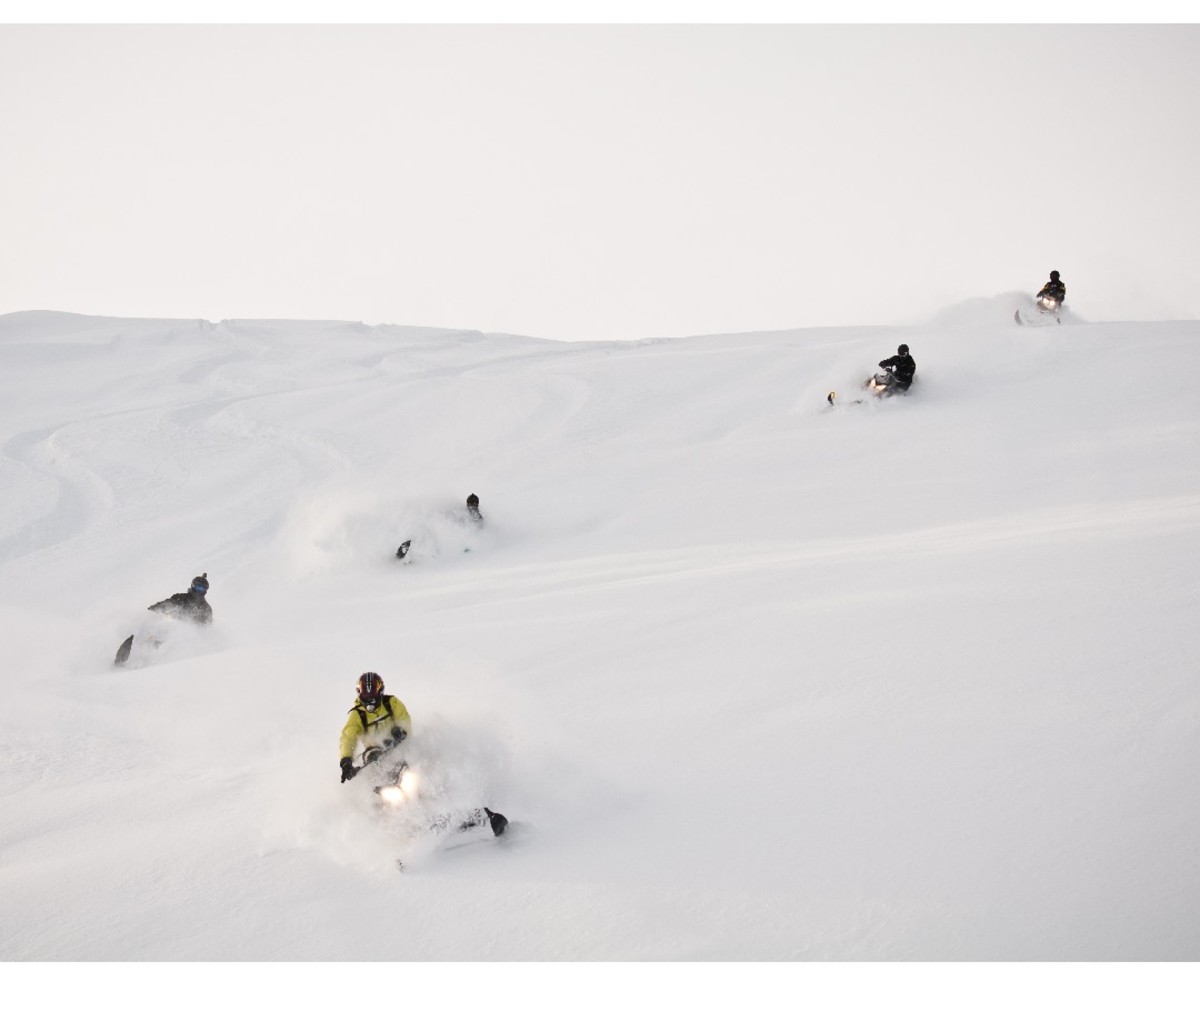 Group of snowmobilers winding down a powdery hill in Revelstoke, British Columbia.